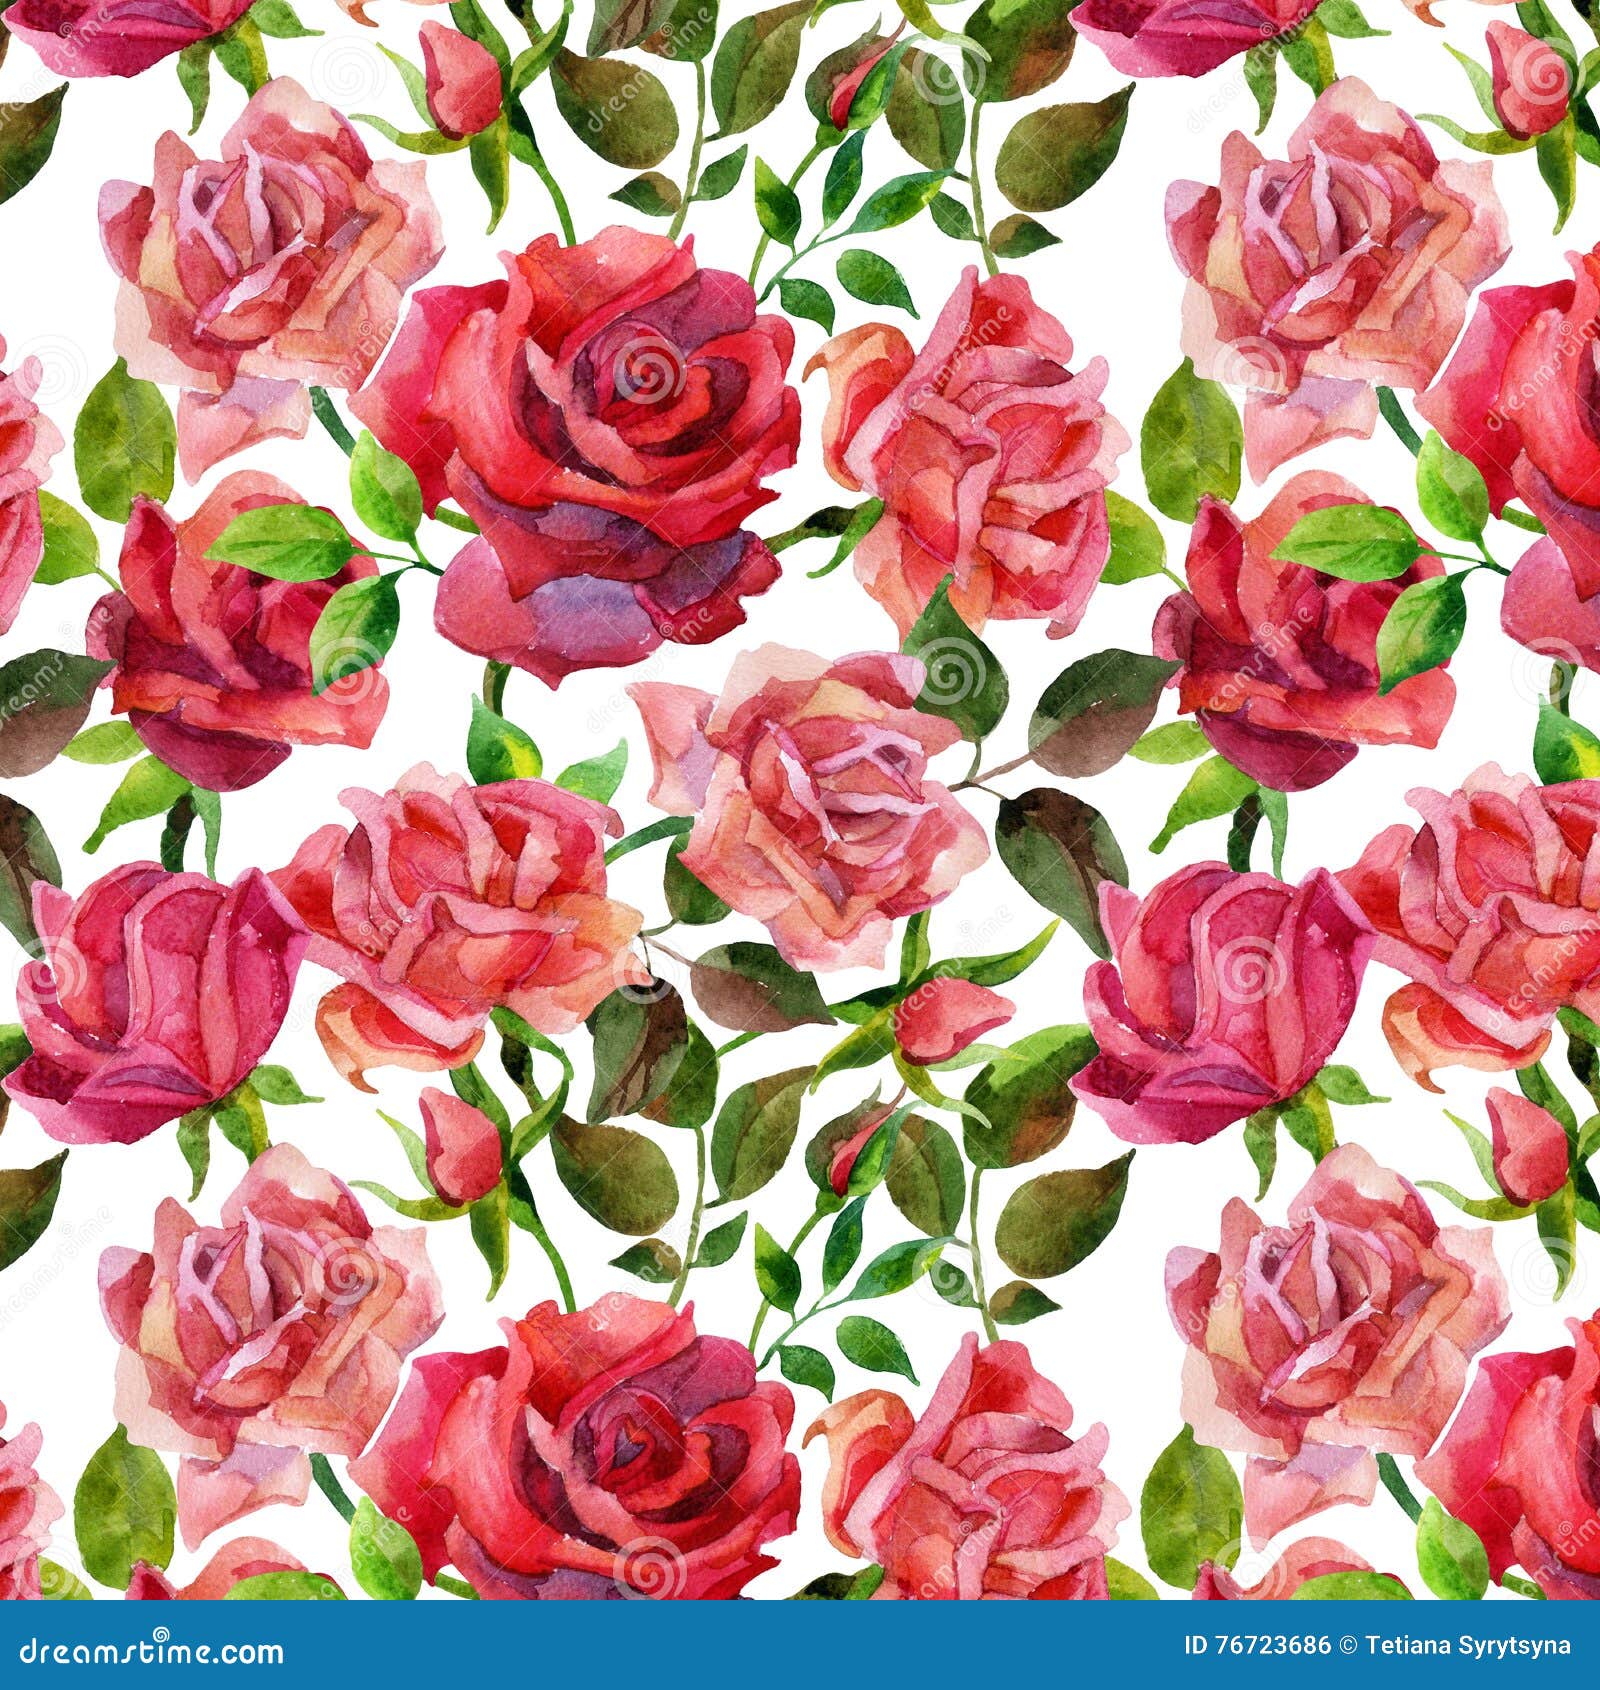 Seamless pattern of watercolor red roses. Illustration of flowers